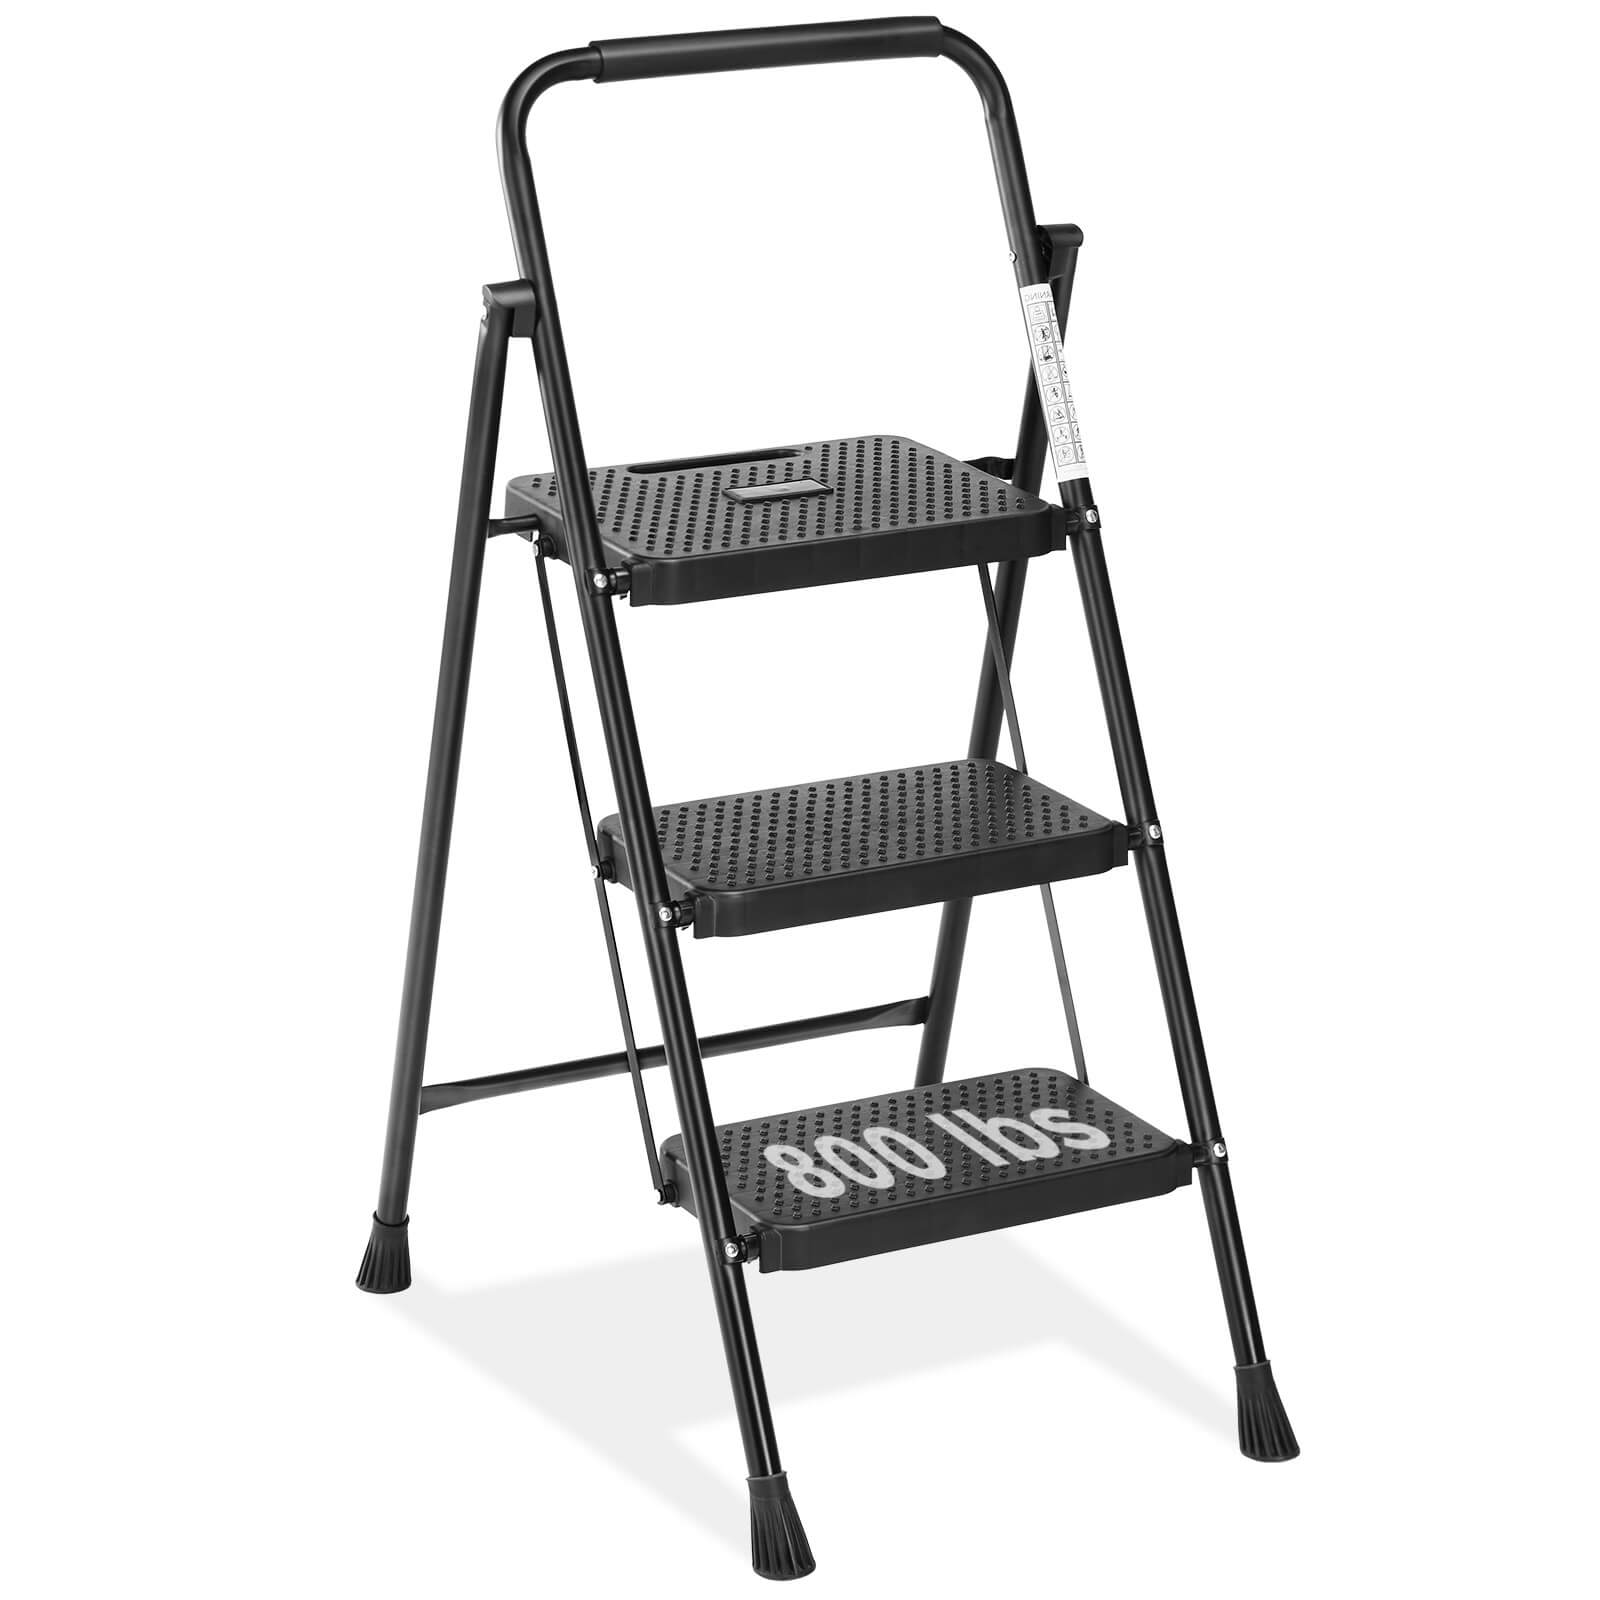 2-step non-slip ladder, 800 lbs Capacity, Foldable, For use in the home and outdoors, picking up and dropping off items